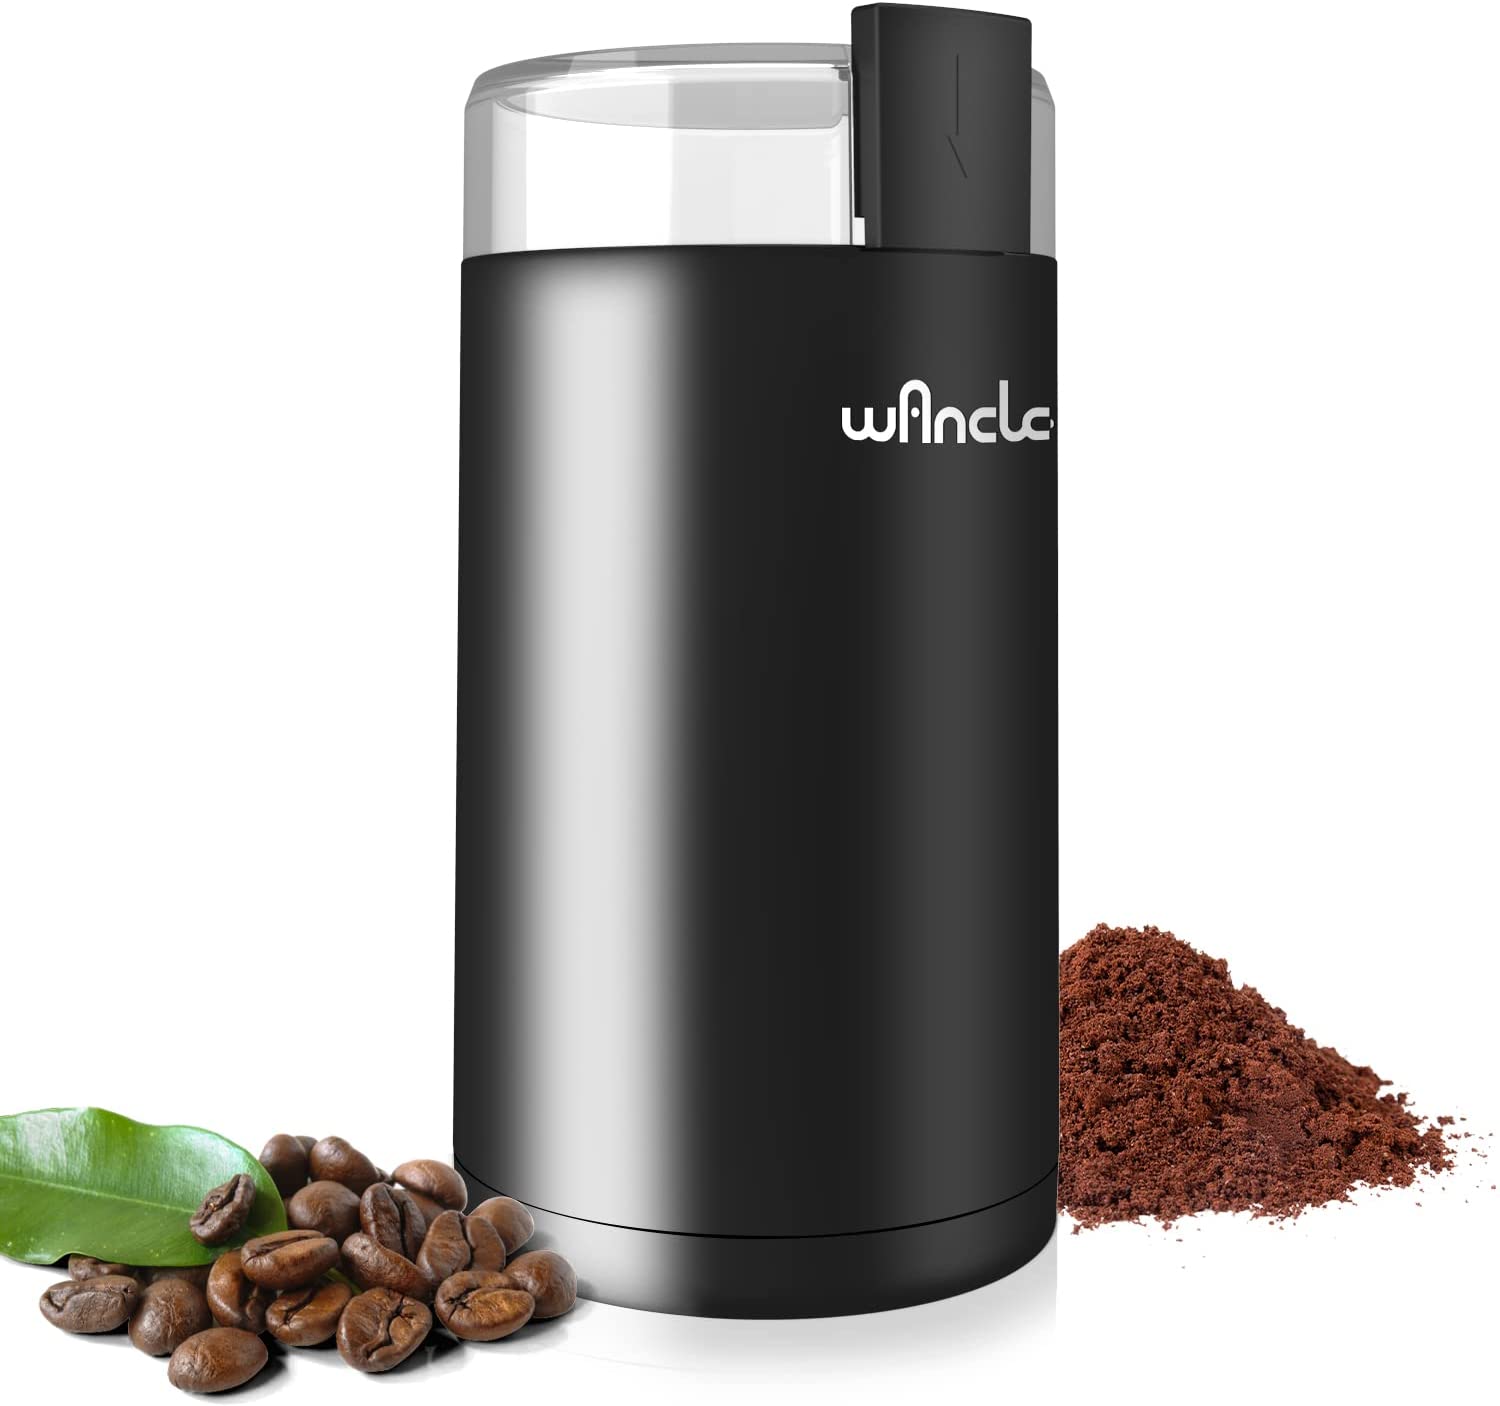 Coffee Grinder, Wancle Electric Coffee Grinder for Beans & Spices, Stainless Steel Blade, Bowl, Quiet Coffee Grinder With Clean Brush With One Button for Coarse and Fine Grinder (Black + Black)